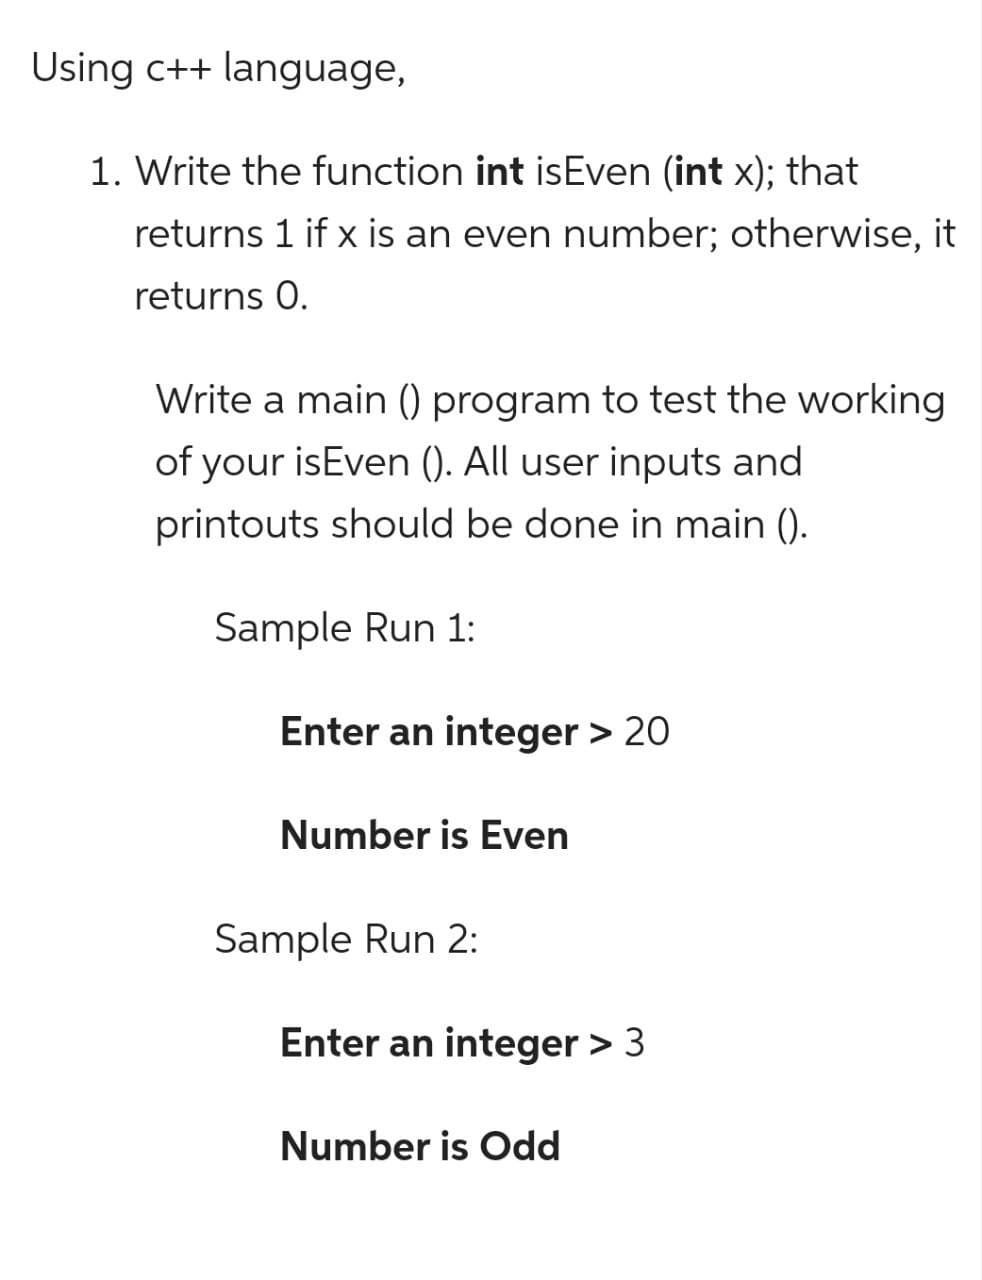 Using c++ language,
1. Write the function int isEven (int x); that
returns 1 if x is an even number; otherwise, it
returns 0.
Write a main () program to test the working
of your isEven (). All user inputs and
printouts should be done in main ().
Sample Run 1:
Enter an integer > 20
Number is Even
Sample Run 2:
Enter an integer > 3
Number is Odd